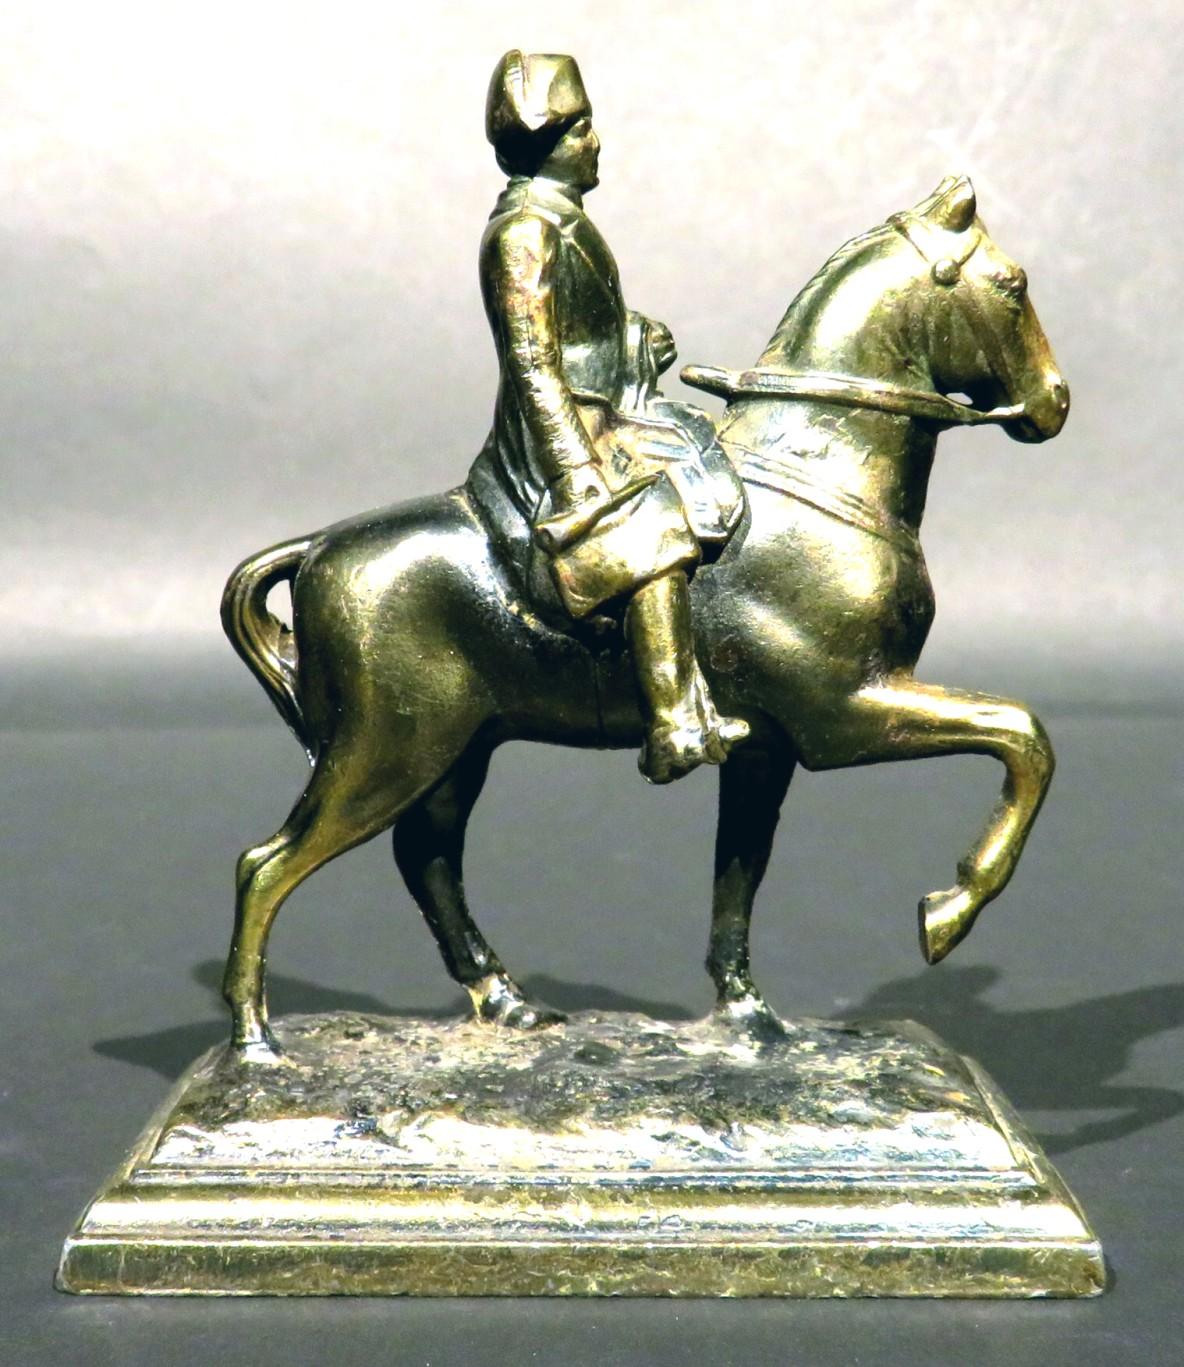 An early 20th century gilt patinated spelter figure of Napoleon Bonaparte on horseback, dressed in military attire and tri-corn hat, mounted atop a naturalistically modelled rocky ground.         (Apparently having been previously mounted on top of